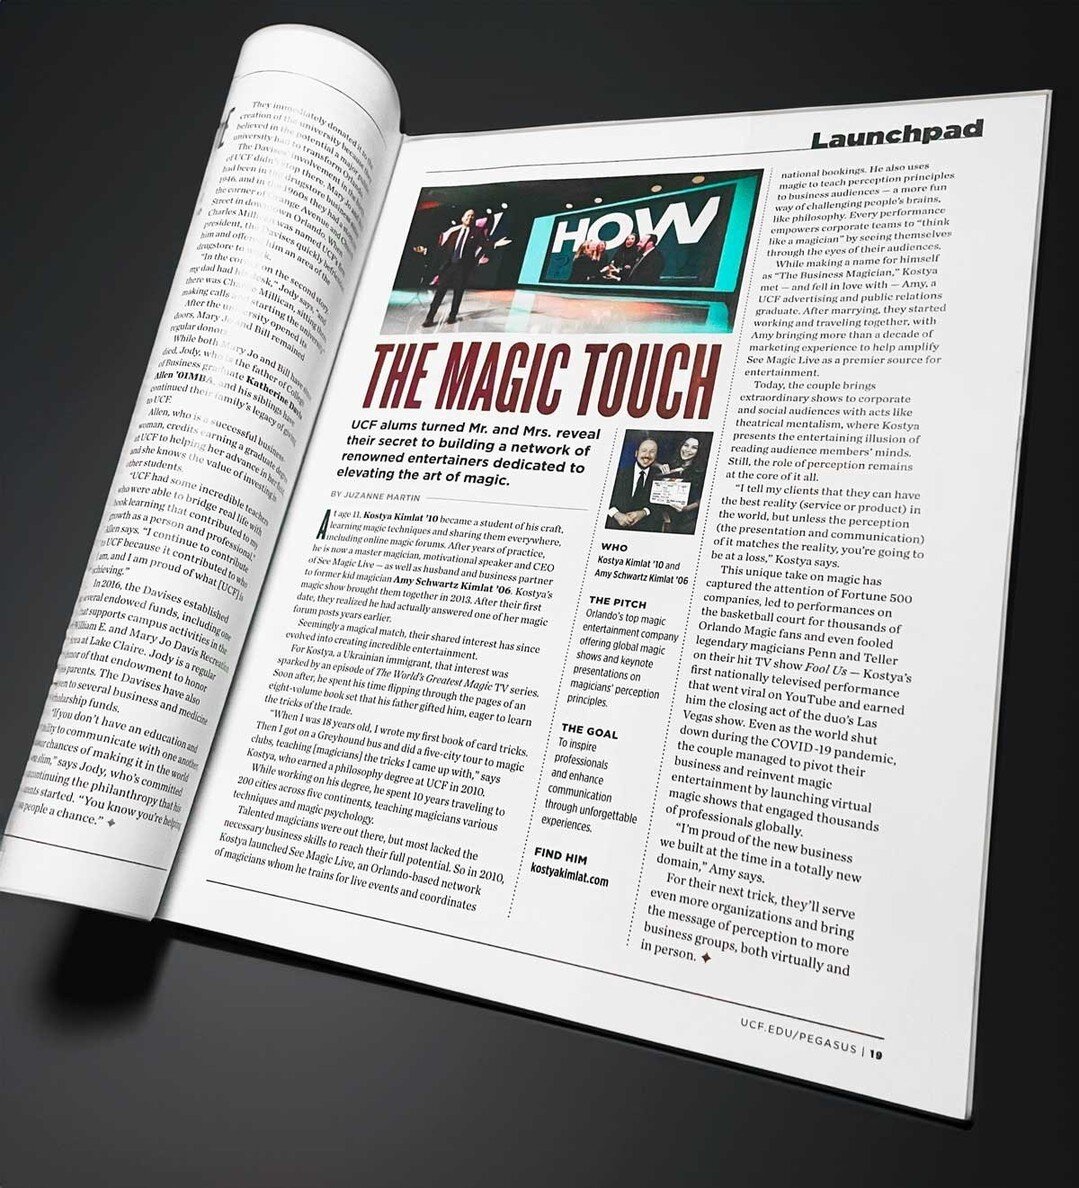 @AmyKimlat and I were thrilled to be featured in Pegasus Magazine, the renowned publication of @UCFAlumni. 

UCF played an instrumental role in our journey. After graduating in 2010, I launched @seemagiclive - a service for training and hiring magici